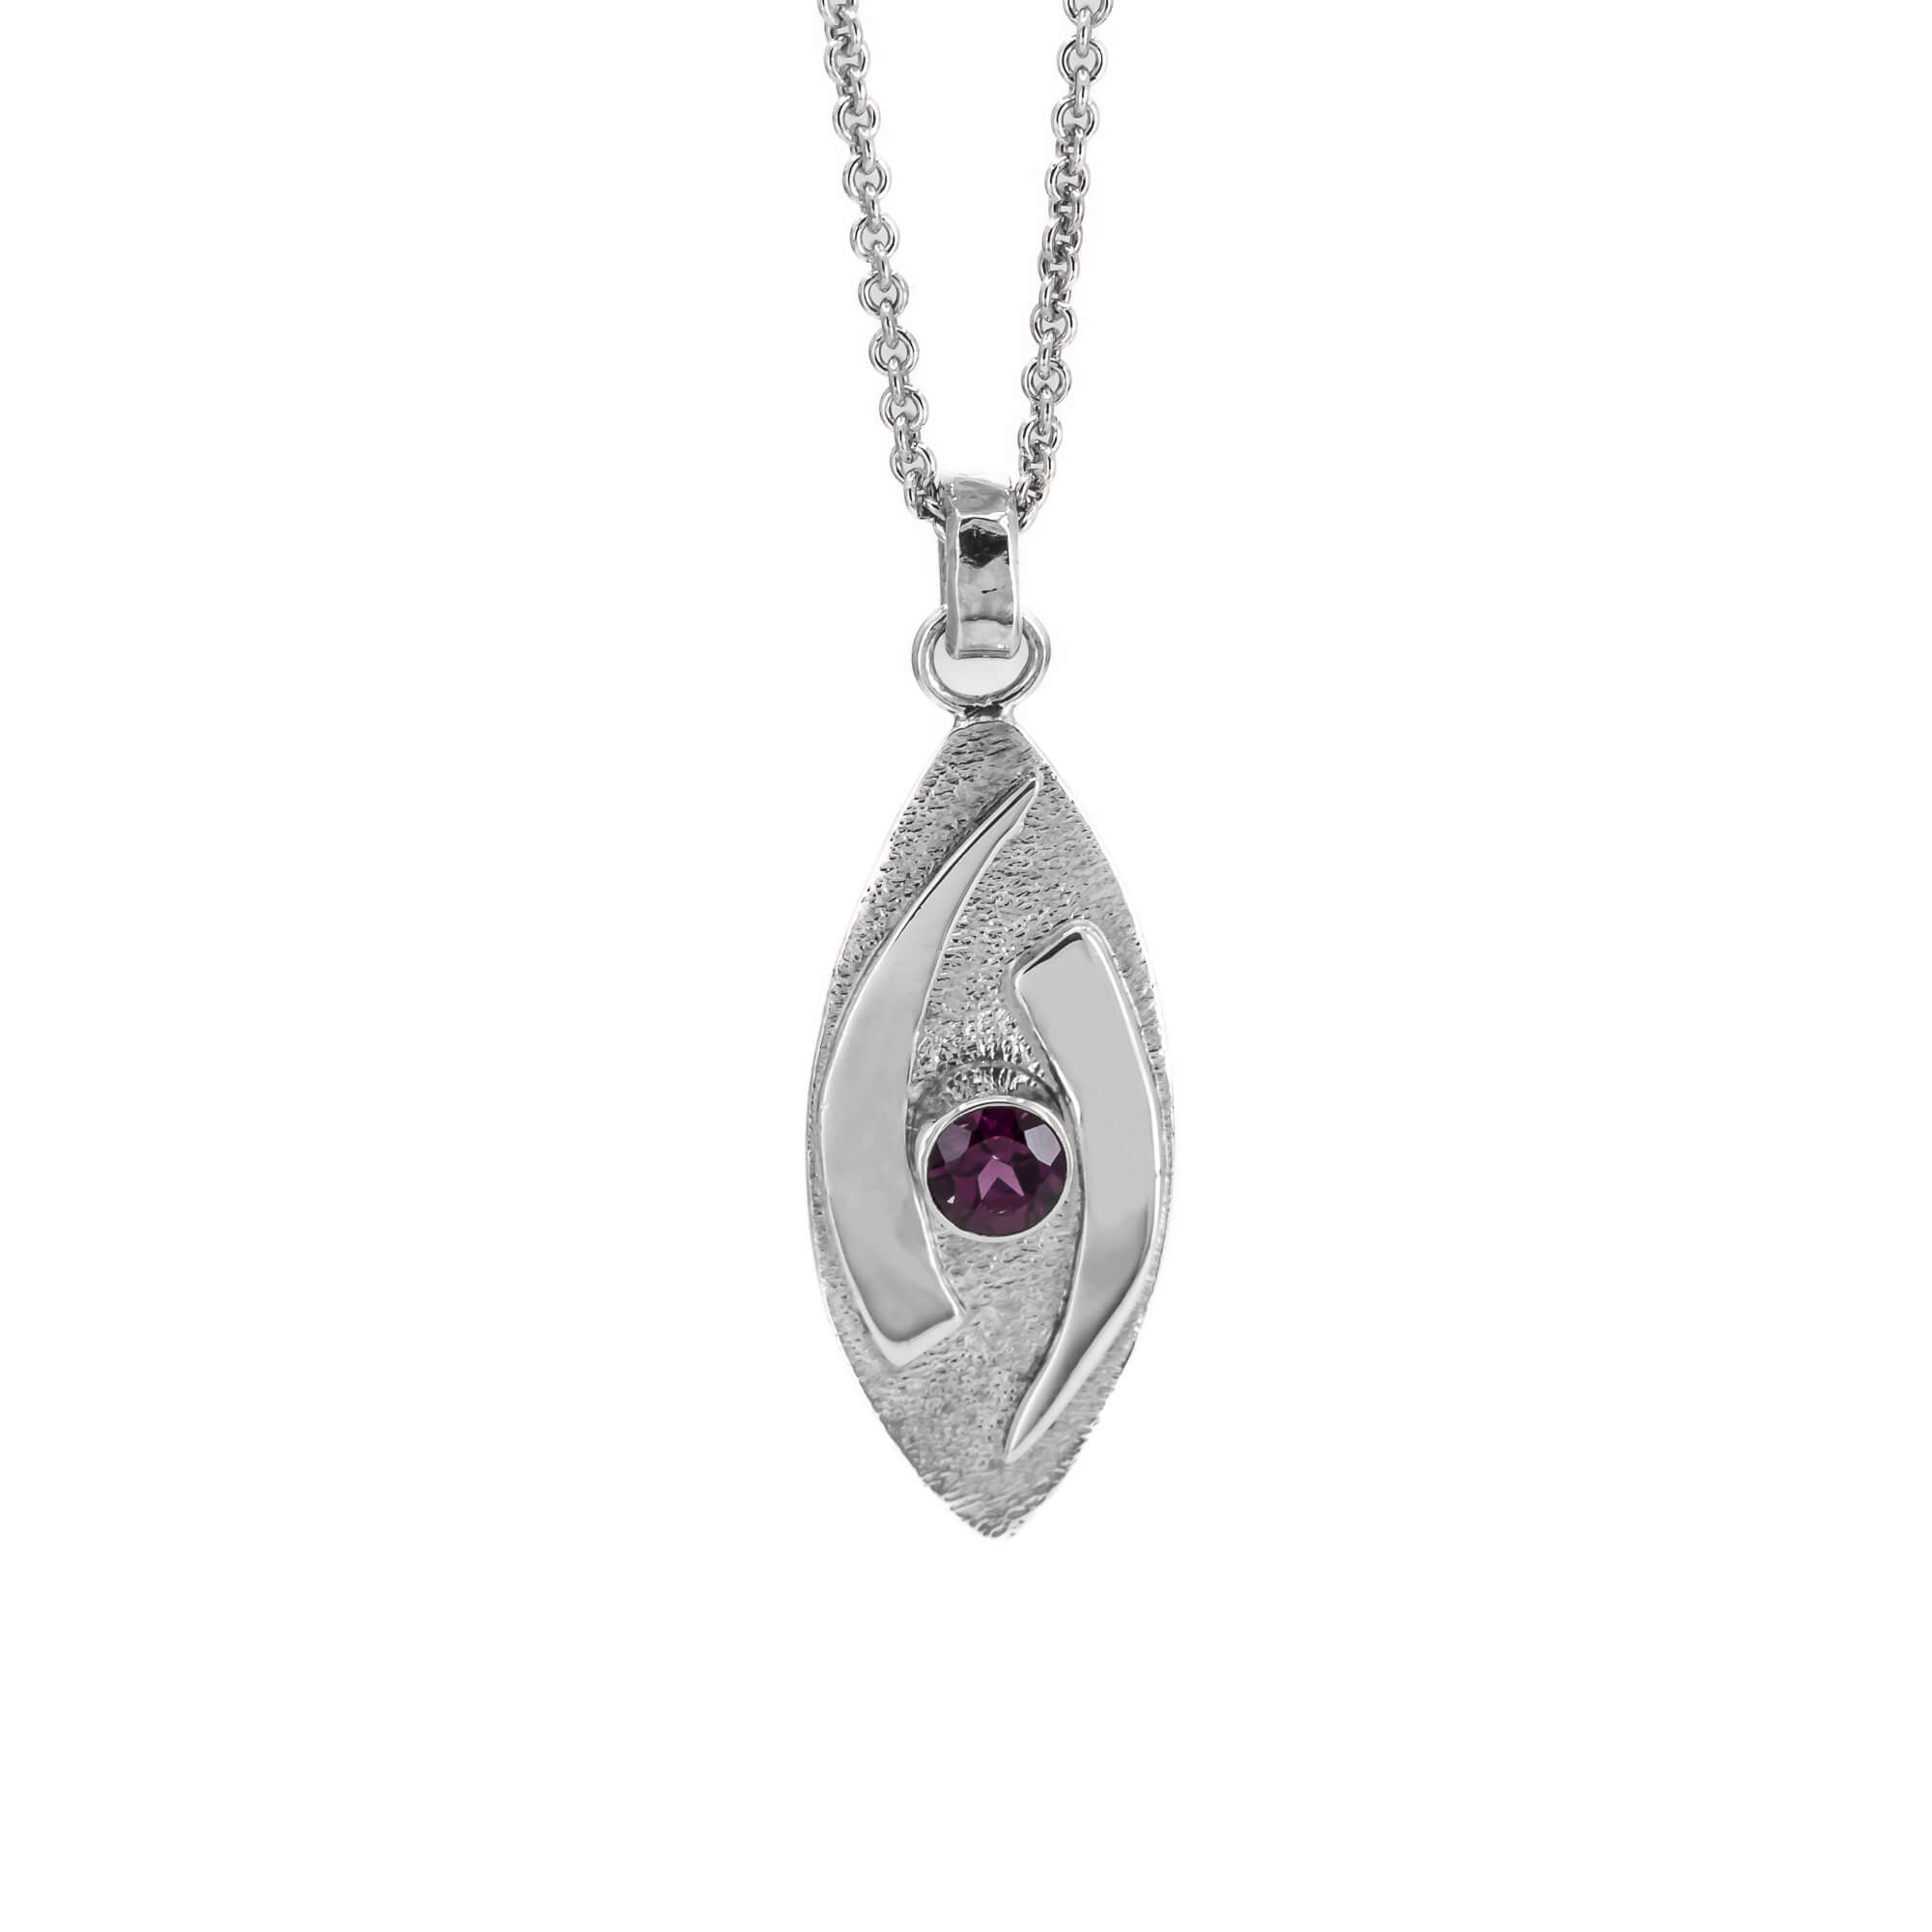 large hugged pendant necklace in sterling silver with a stardust texture and a 5mm Rhodolite garnet faceted stone